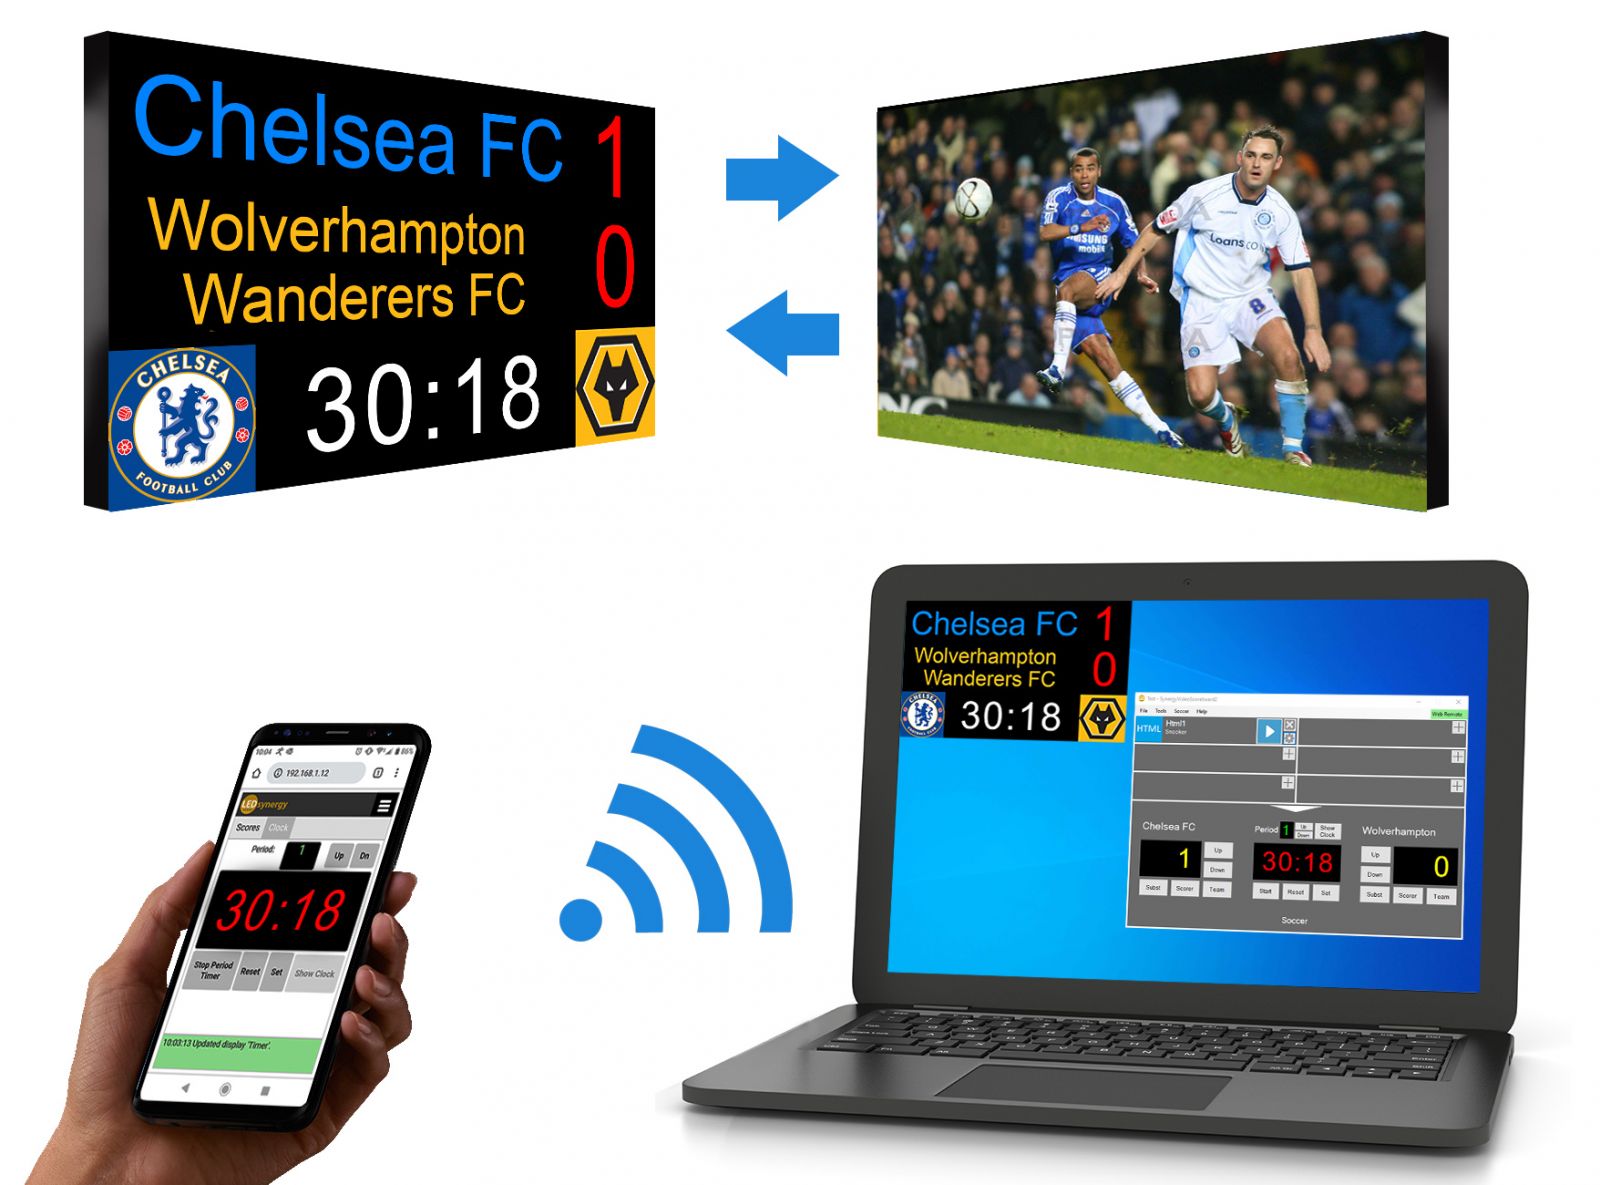 mobile phone with laptop and scoreboard - software and switch screens